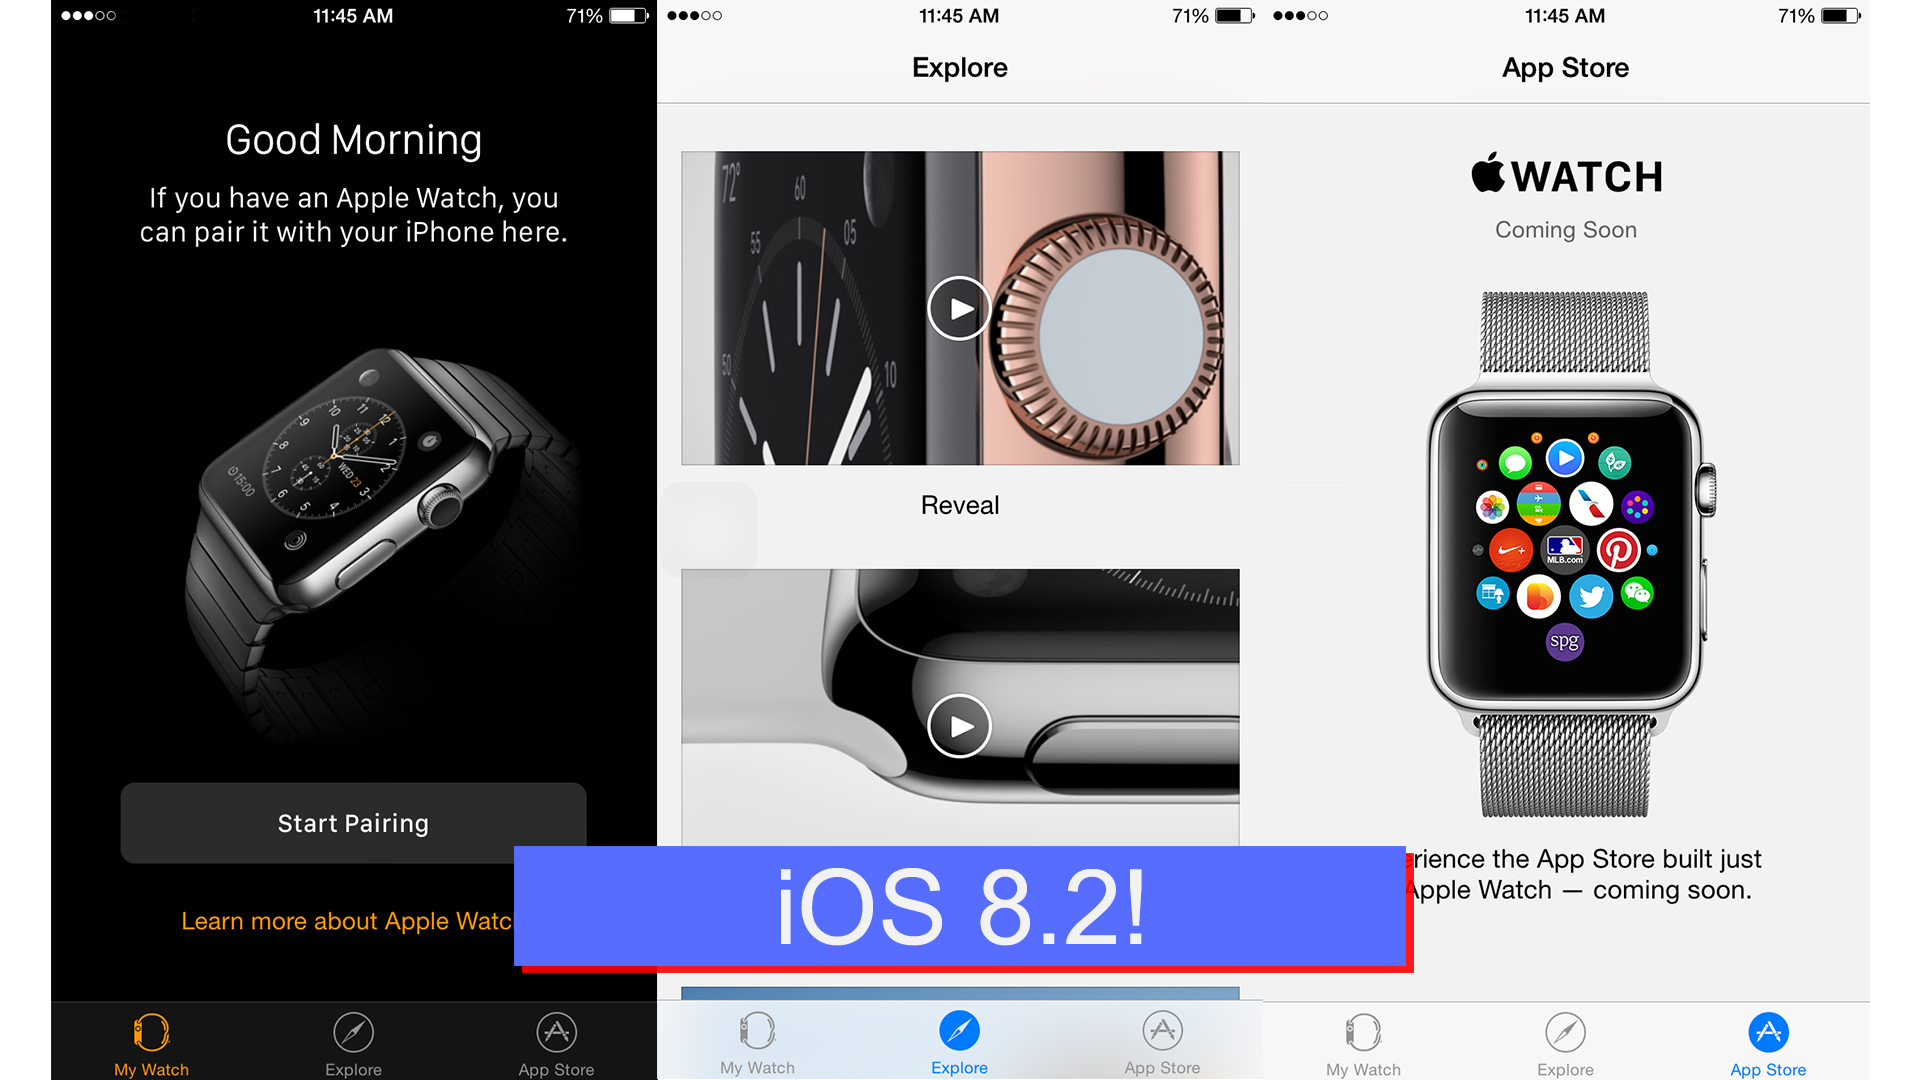 iOS 8.2 is out with a App Store for the Apple Watch! - DDSHD